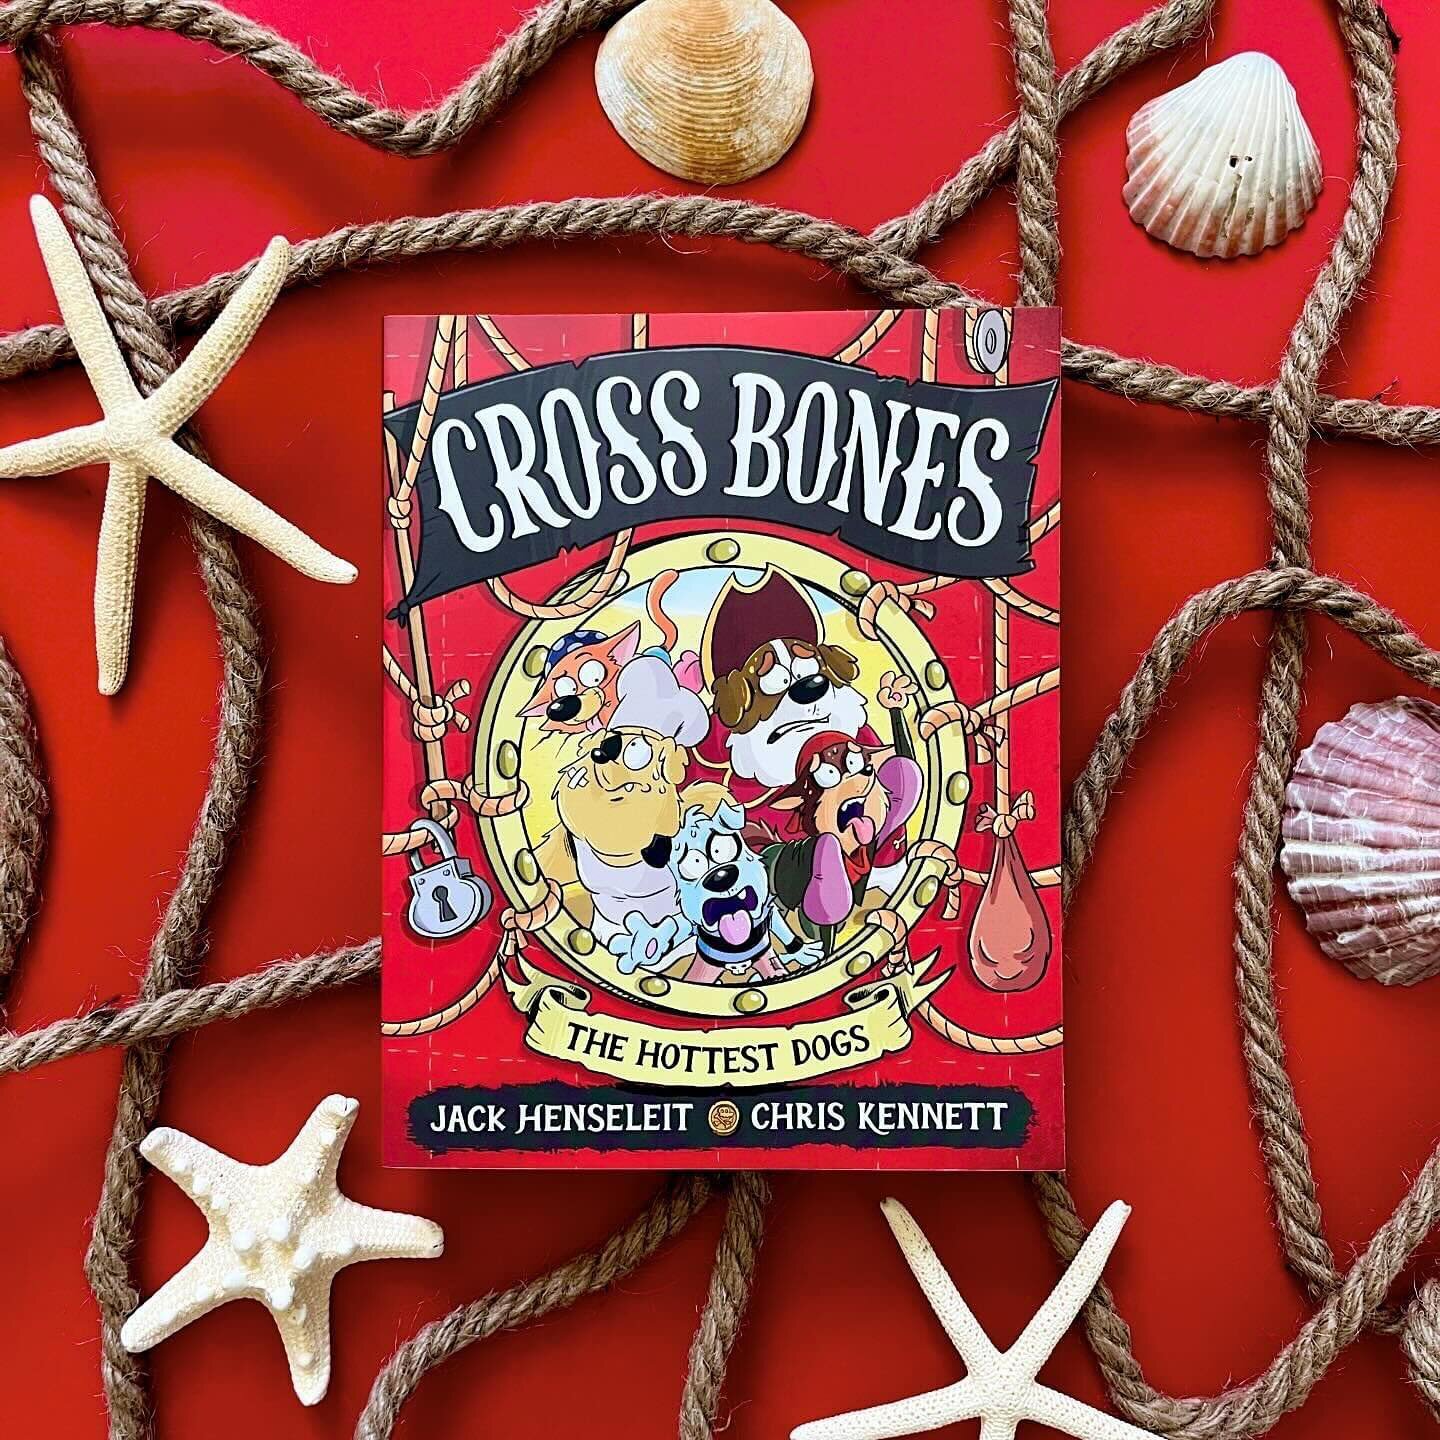 This is a special shout out for Alyssa aka @our.bookish.days who always goes above and beyond for her book review photos. She has always been a great supporter of our Cross Bones books and has just posted a lovely review of our latest and, some might